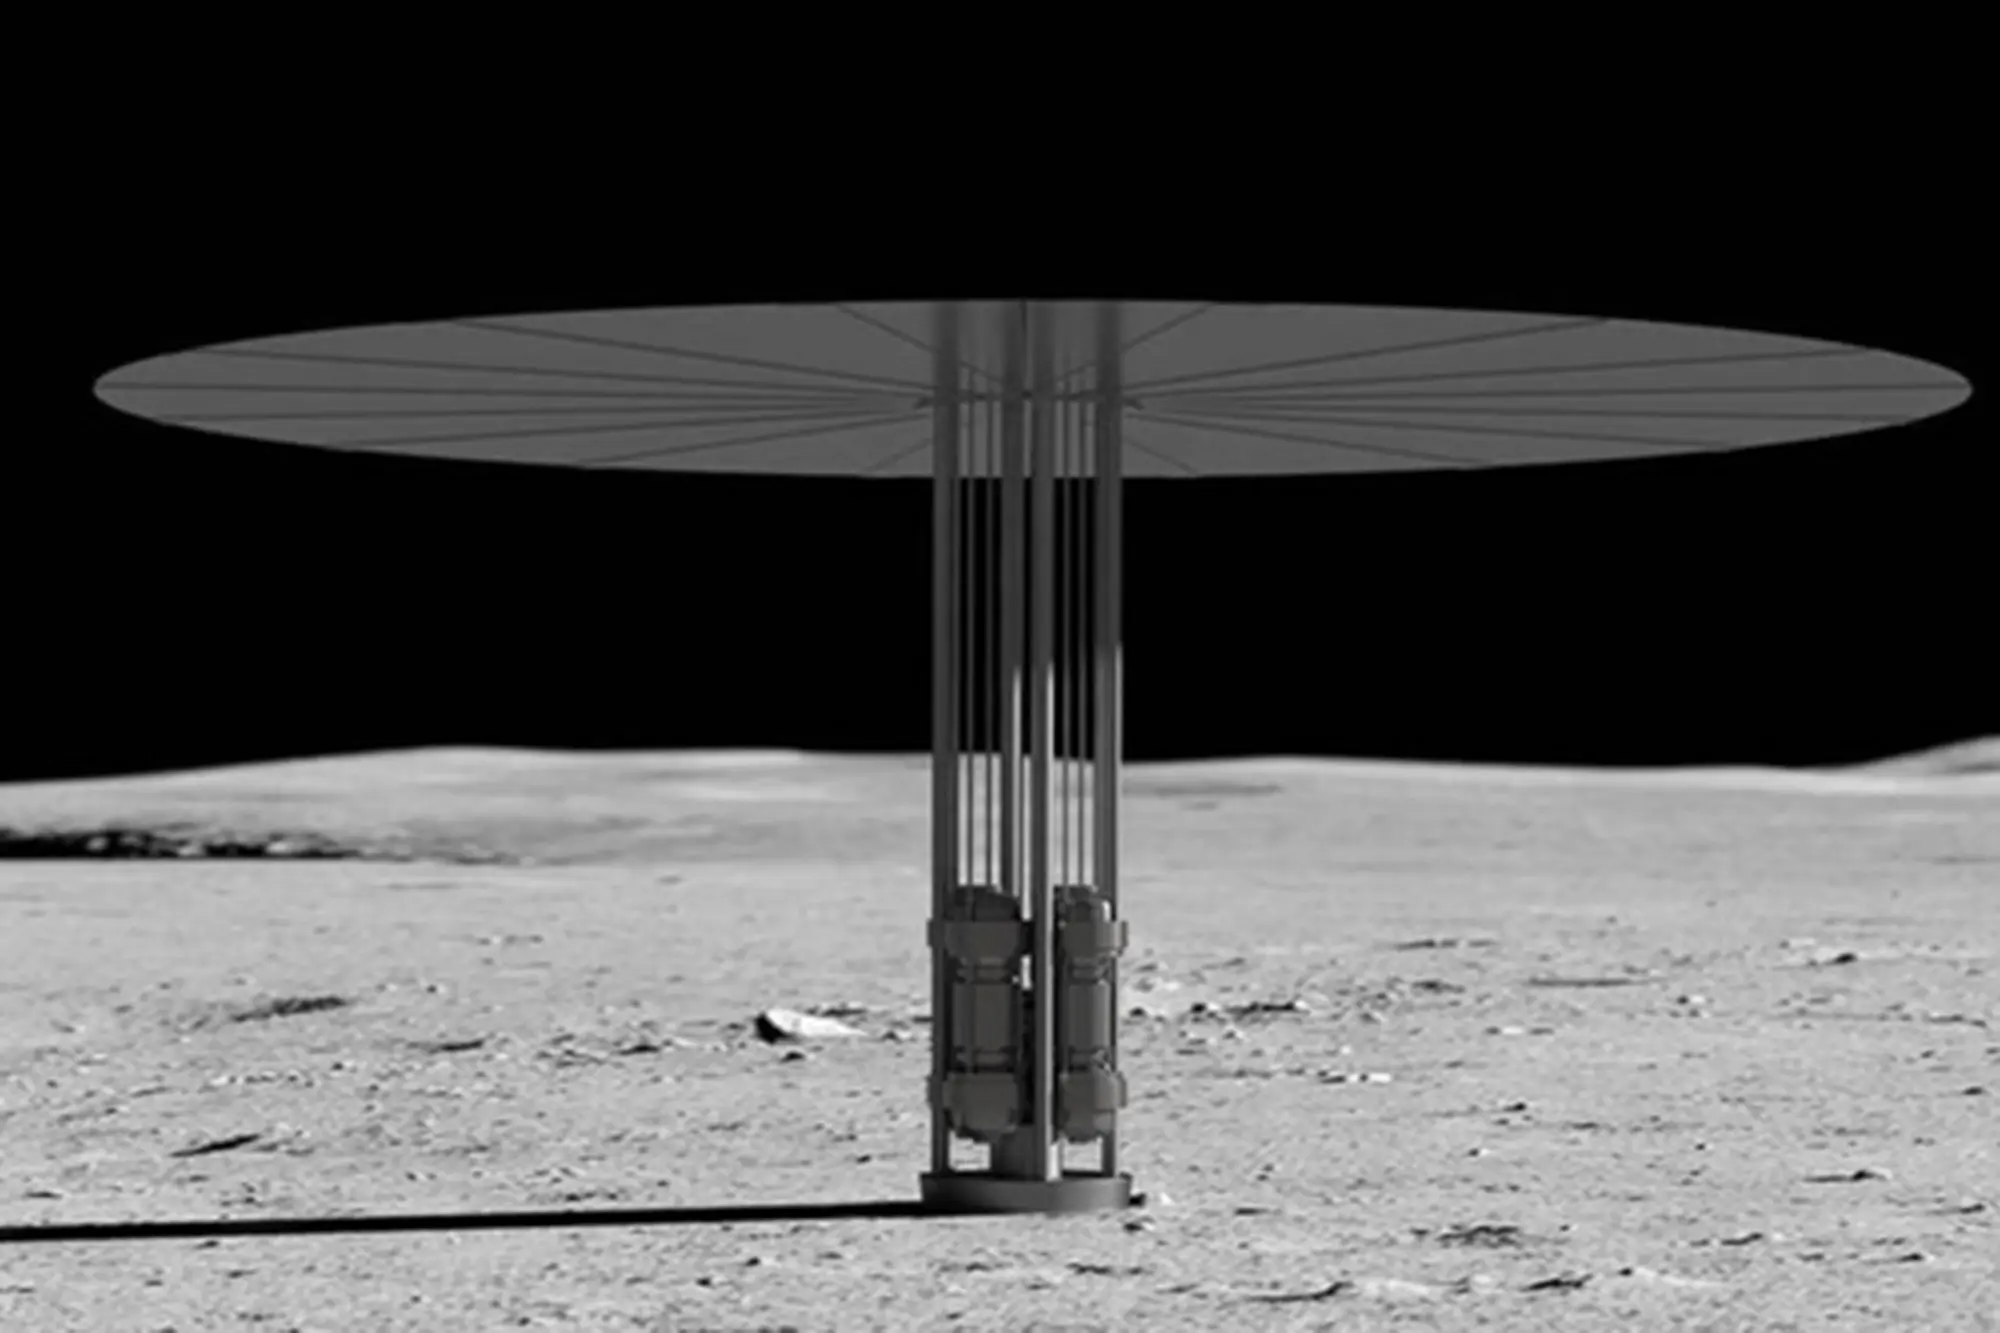 NASA Will Put A Nuclear Reactor On The Moon